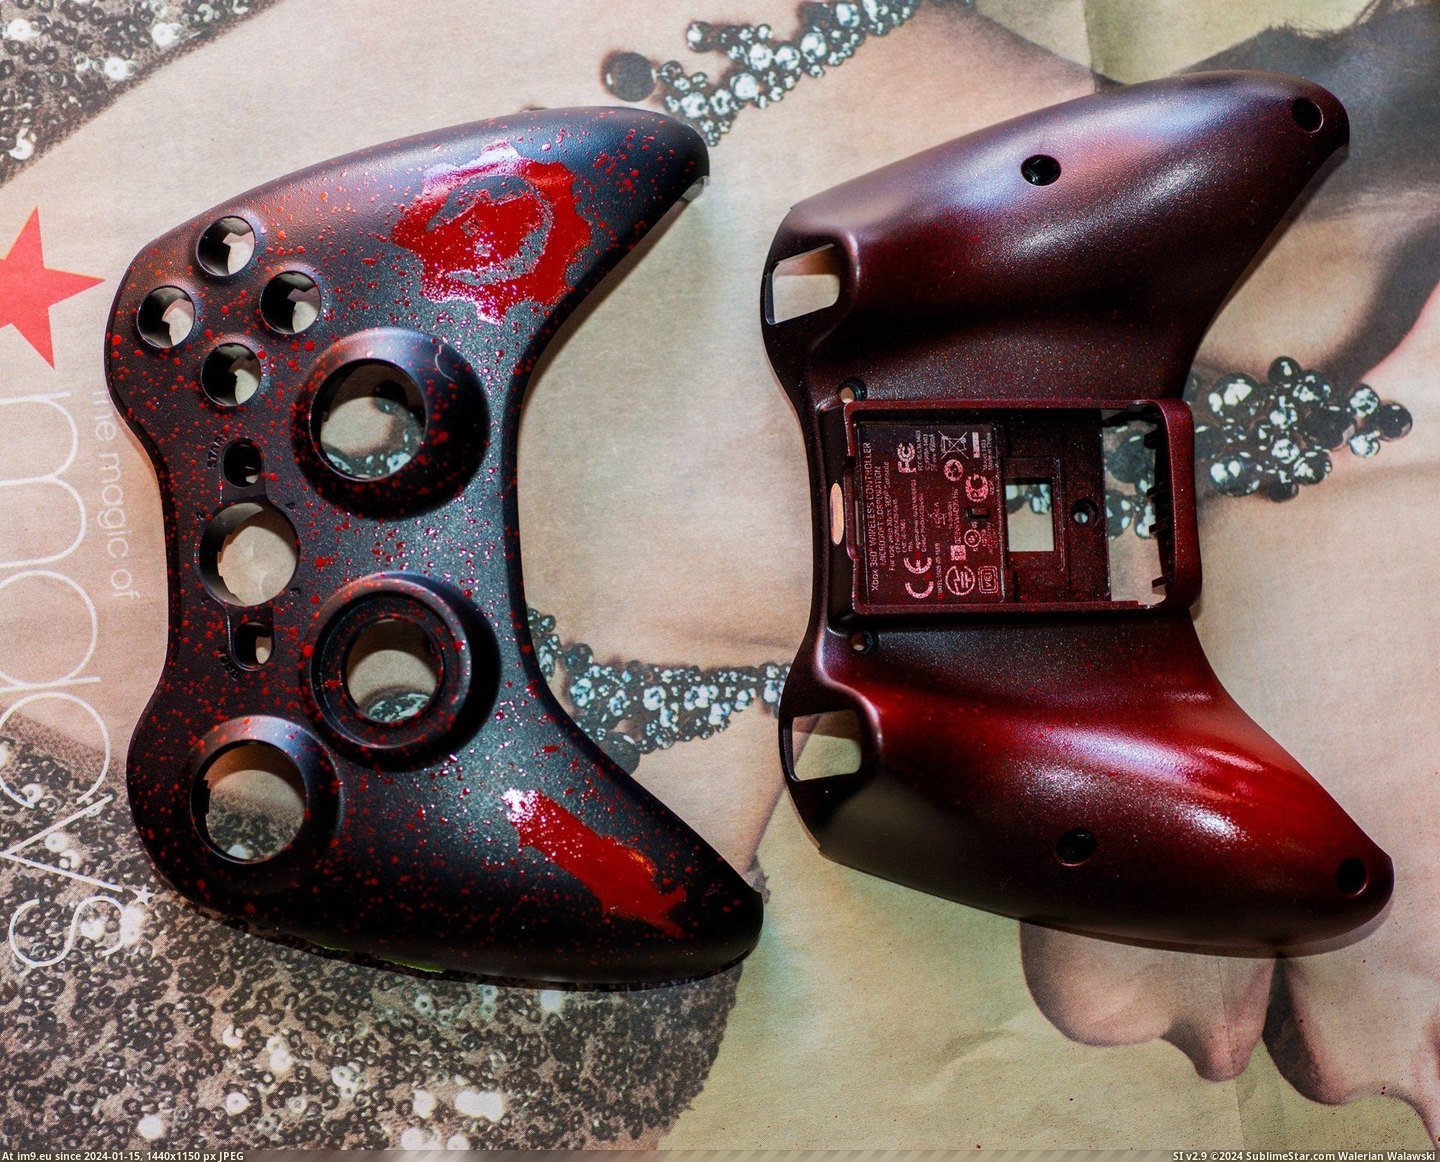 #Gaming #One #War #Controller #Redditor #Gears #Lucky #Painted #Xbox [Gaming] One lucky redditor is getting a custom painted Gears of War Xbox 360 controller! 3 Pic. (Image of album My r/GAMING favs))